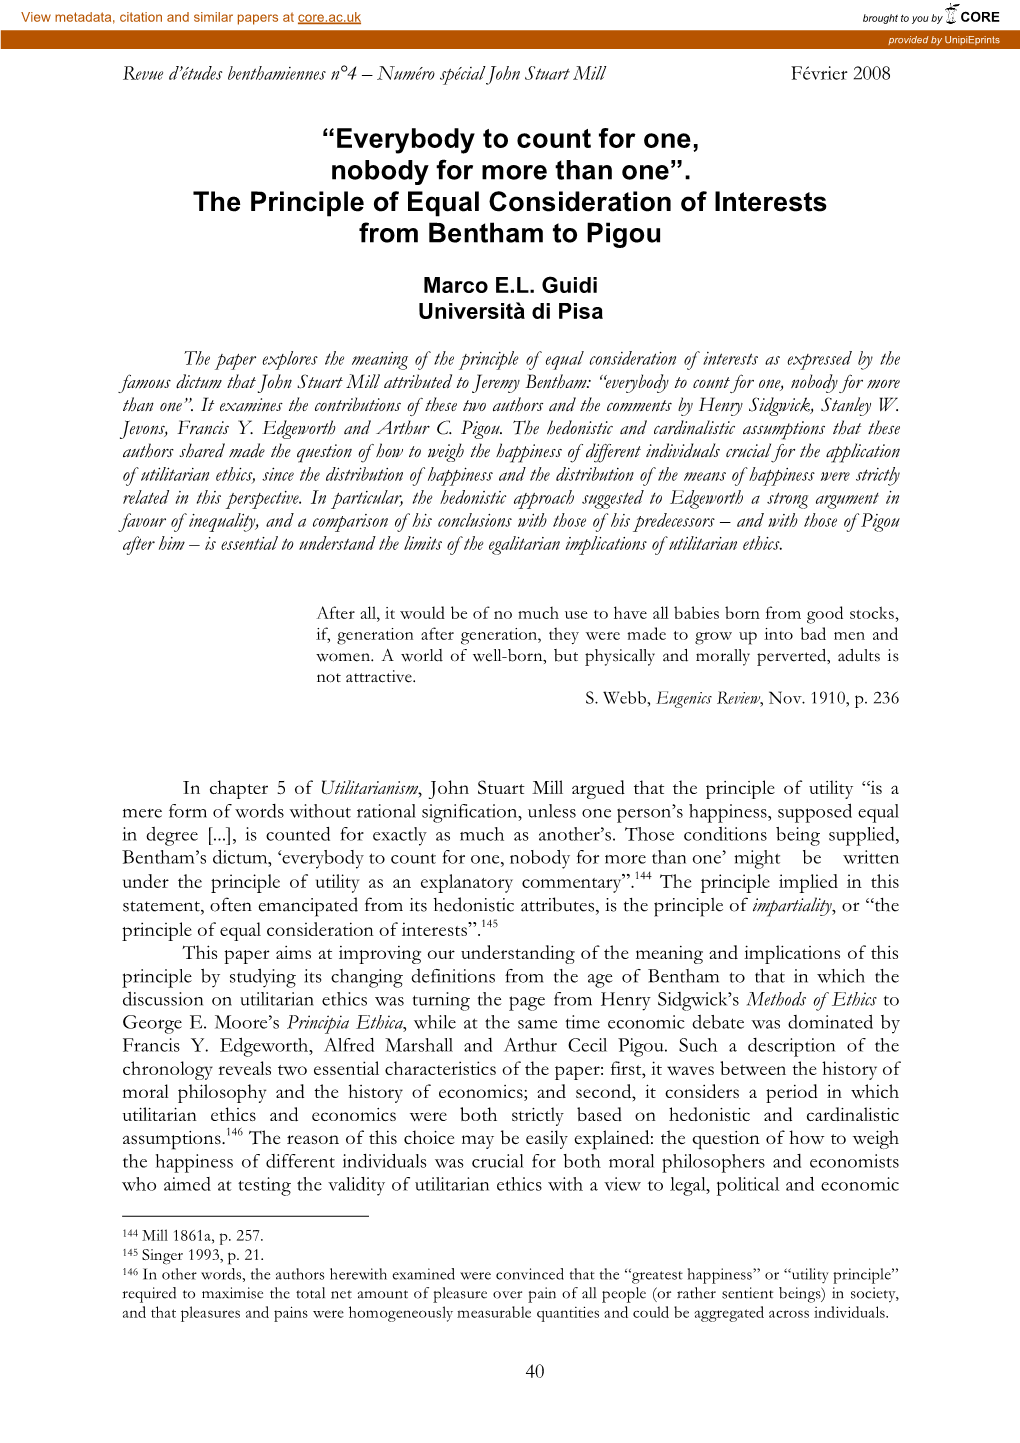 The Principle of Equal Consideration of Interests from Bentham to Pigou